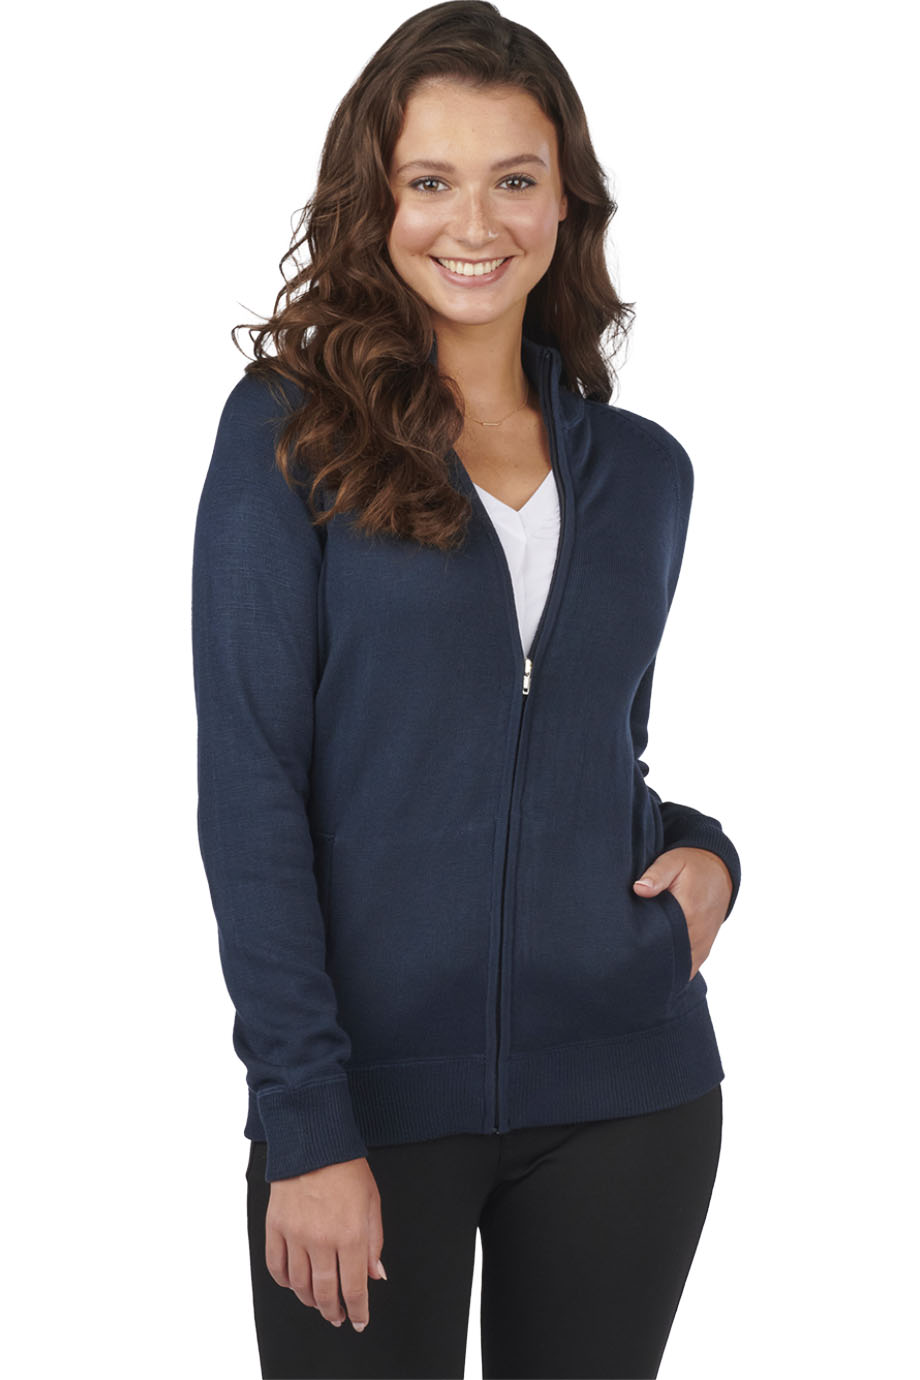 FULL-ZIP SWEATER JACKET WITH POCKETS